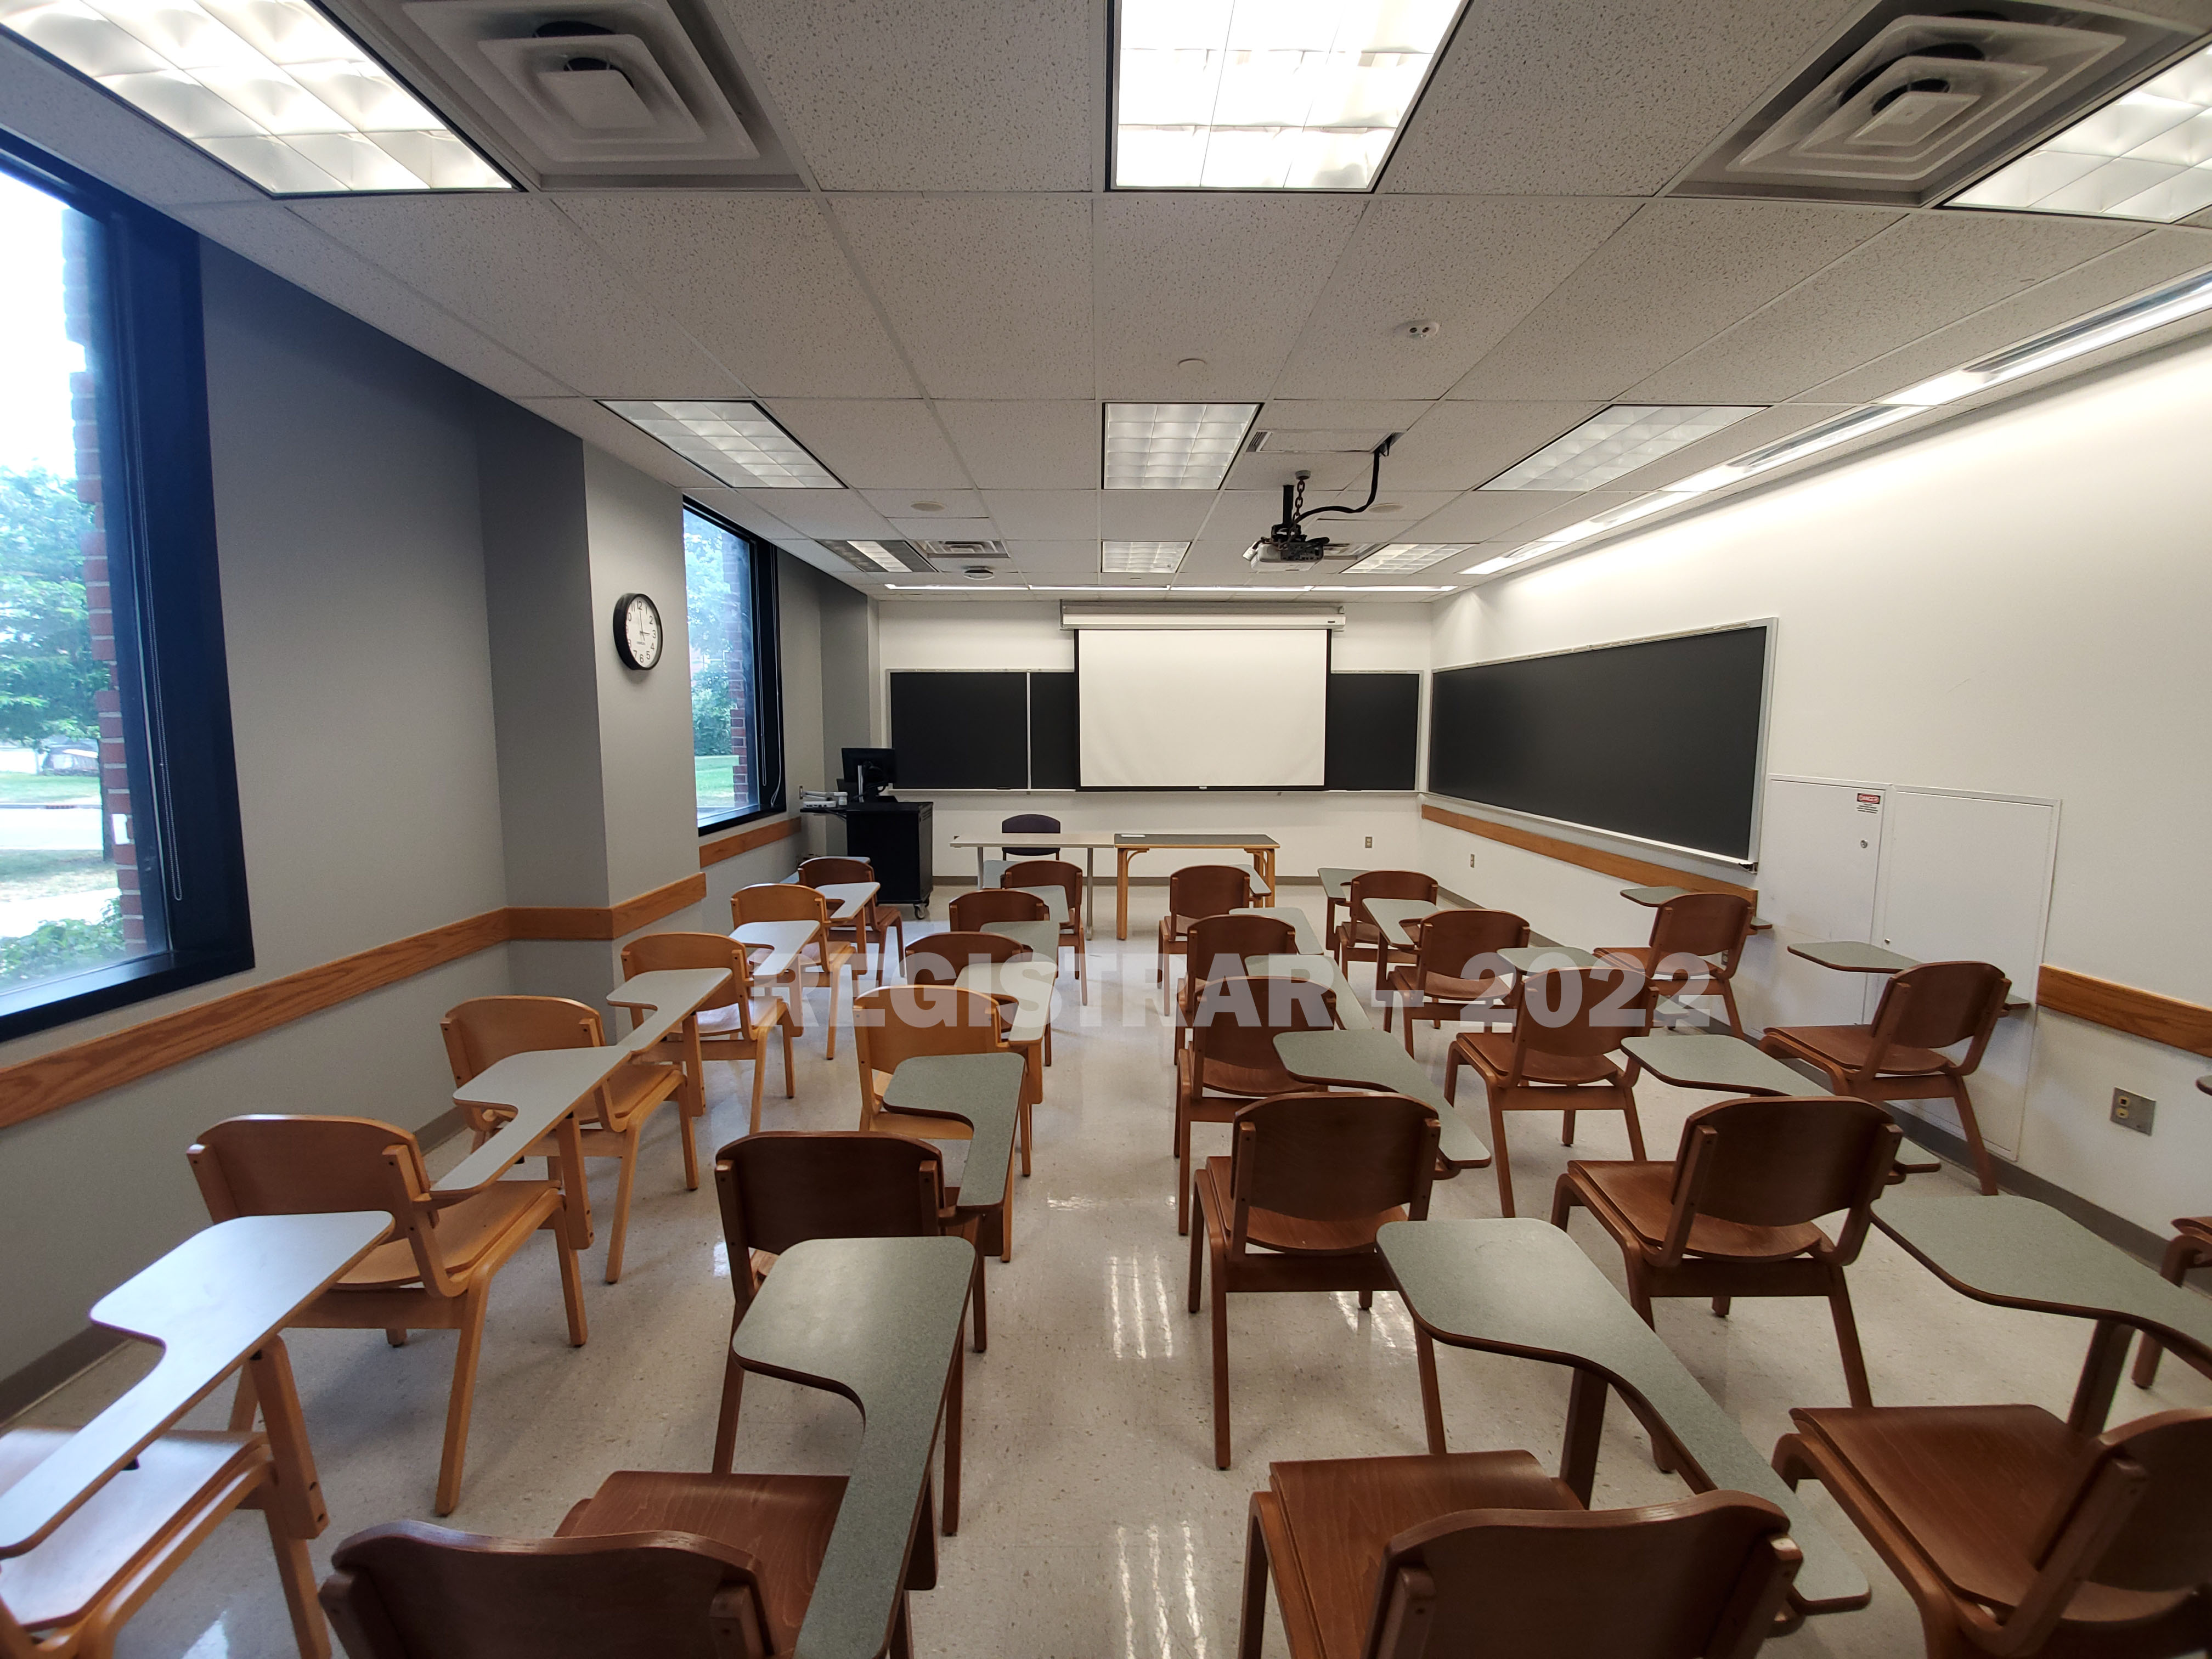 McPherson Chemical Lab room 1005 ultra wide angle view from the back of the room with projector screen down